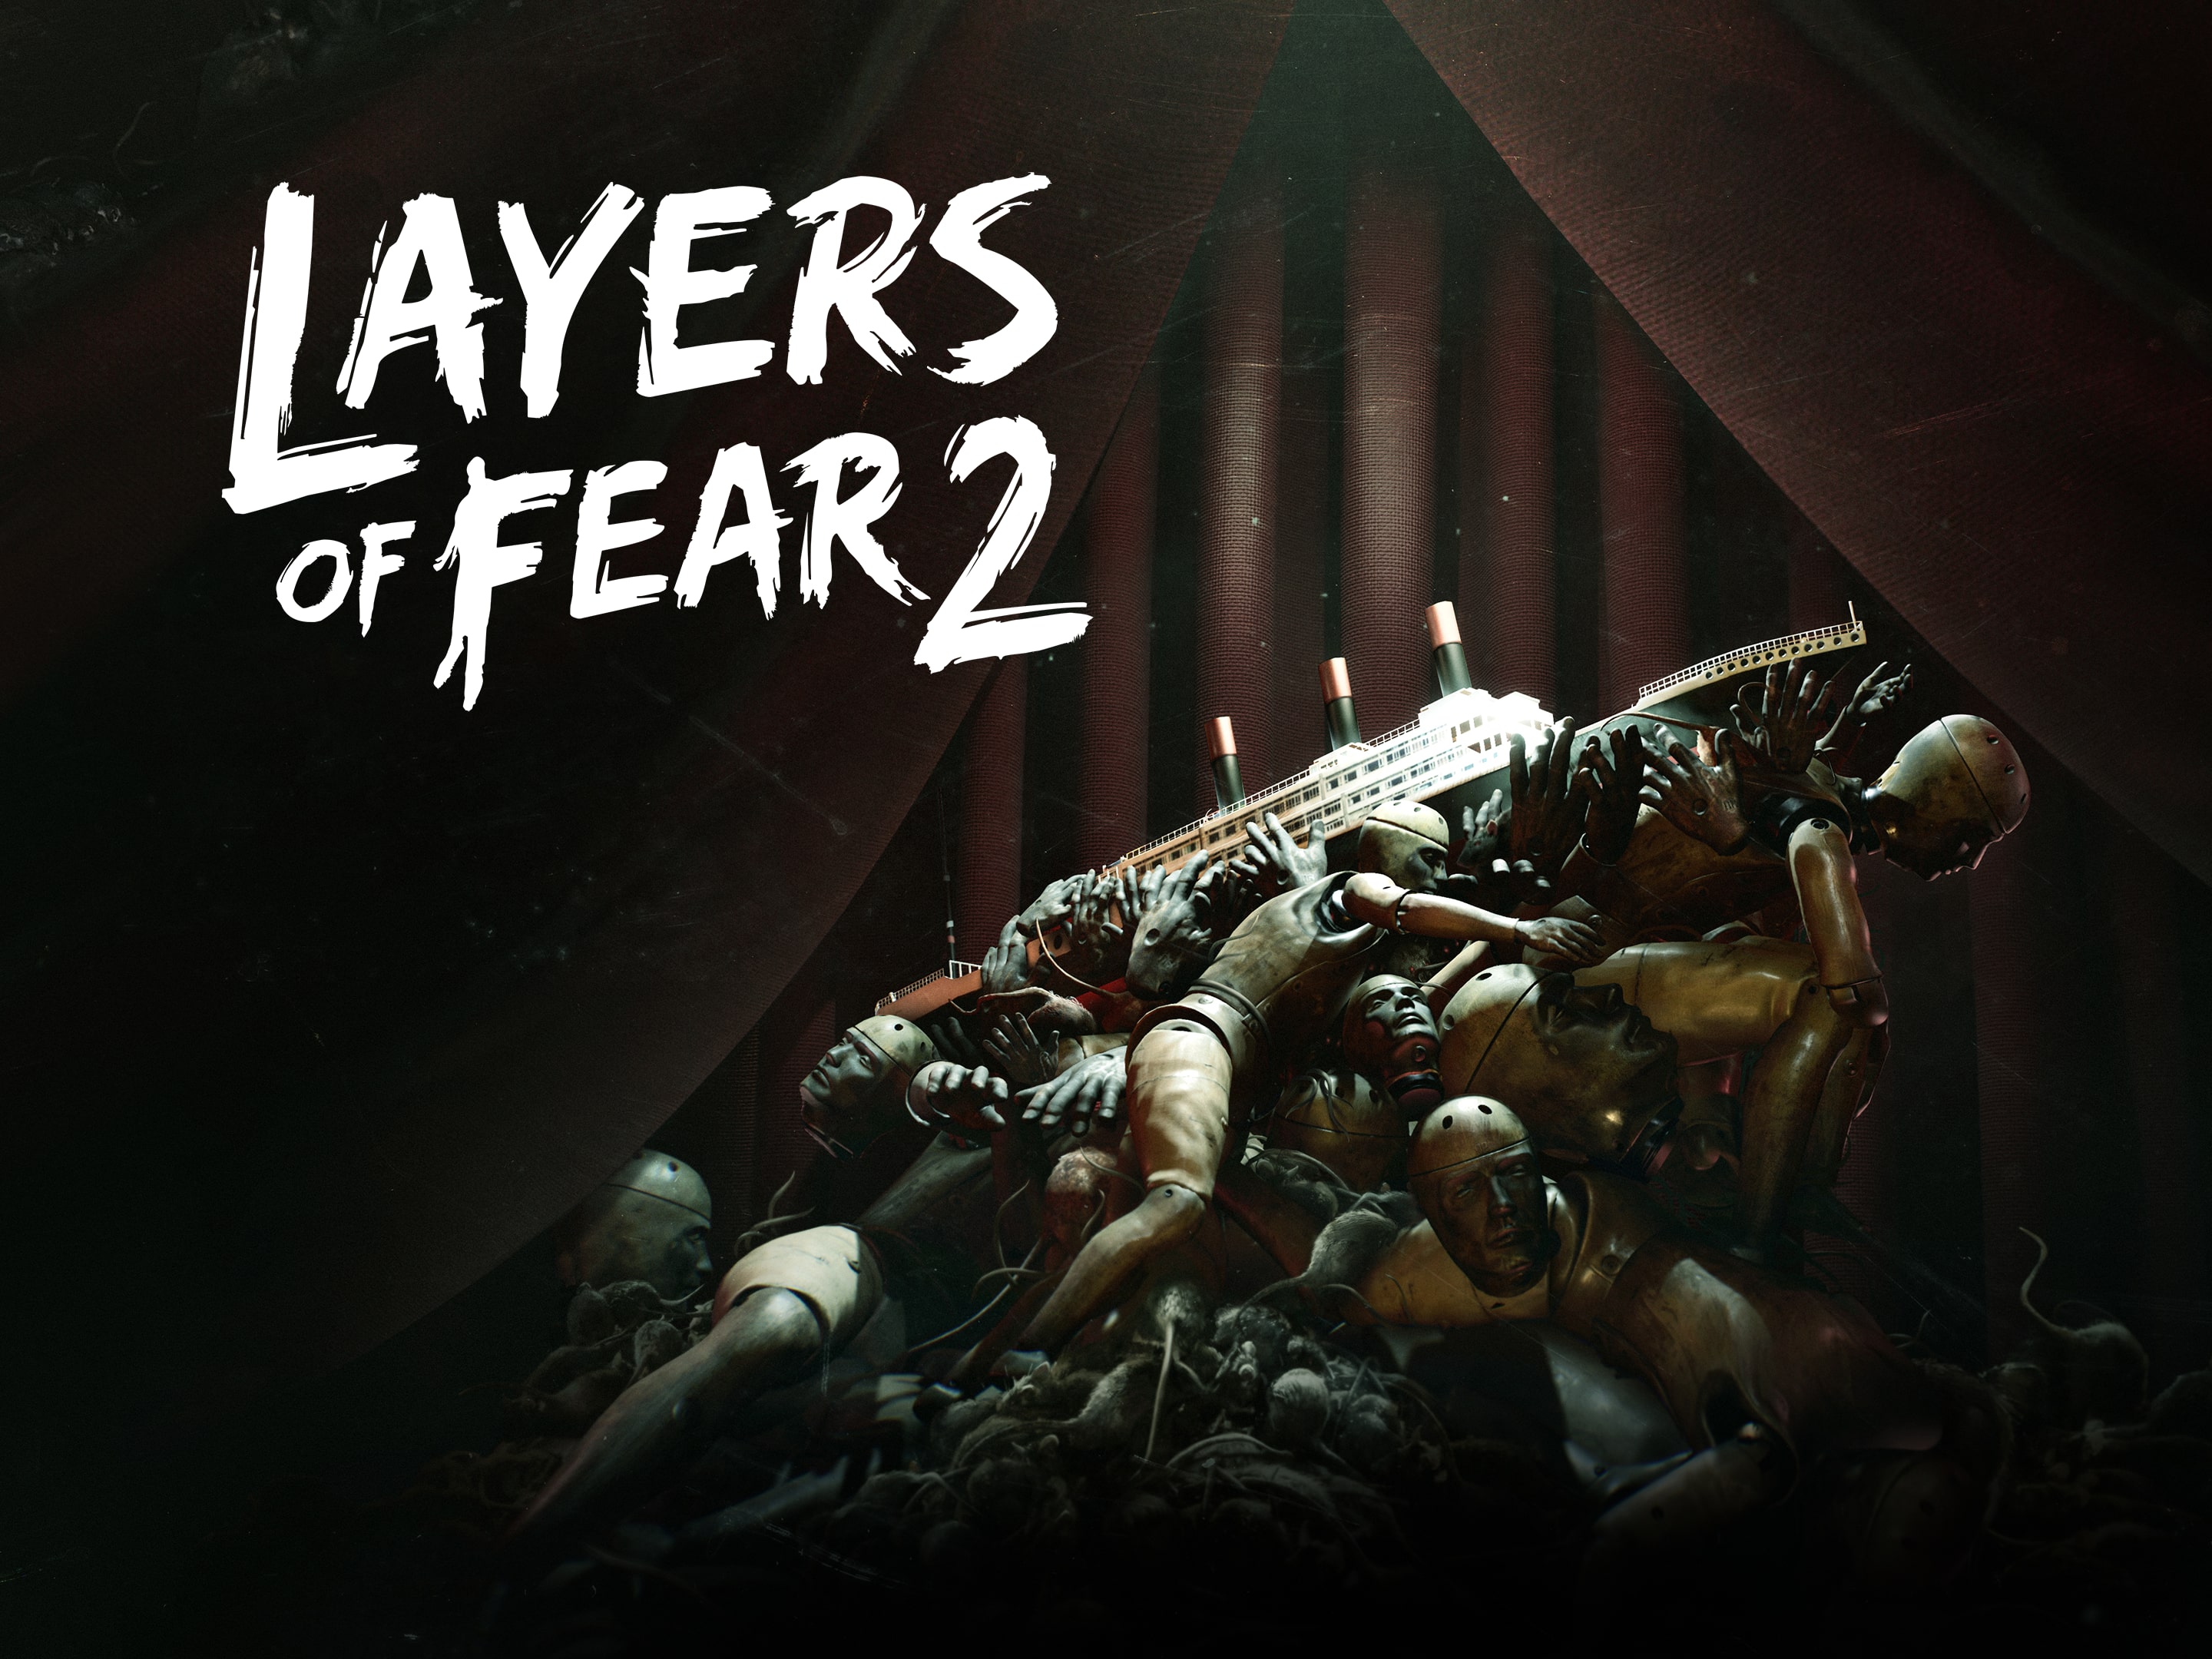 Layers of Fear 2 (PS4) cheap - Price of $17.27